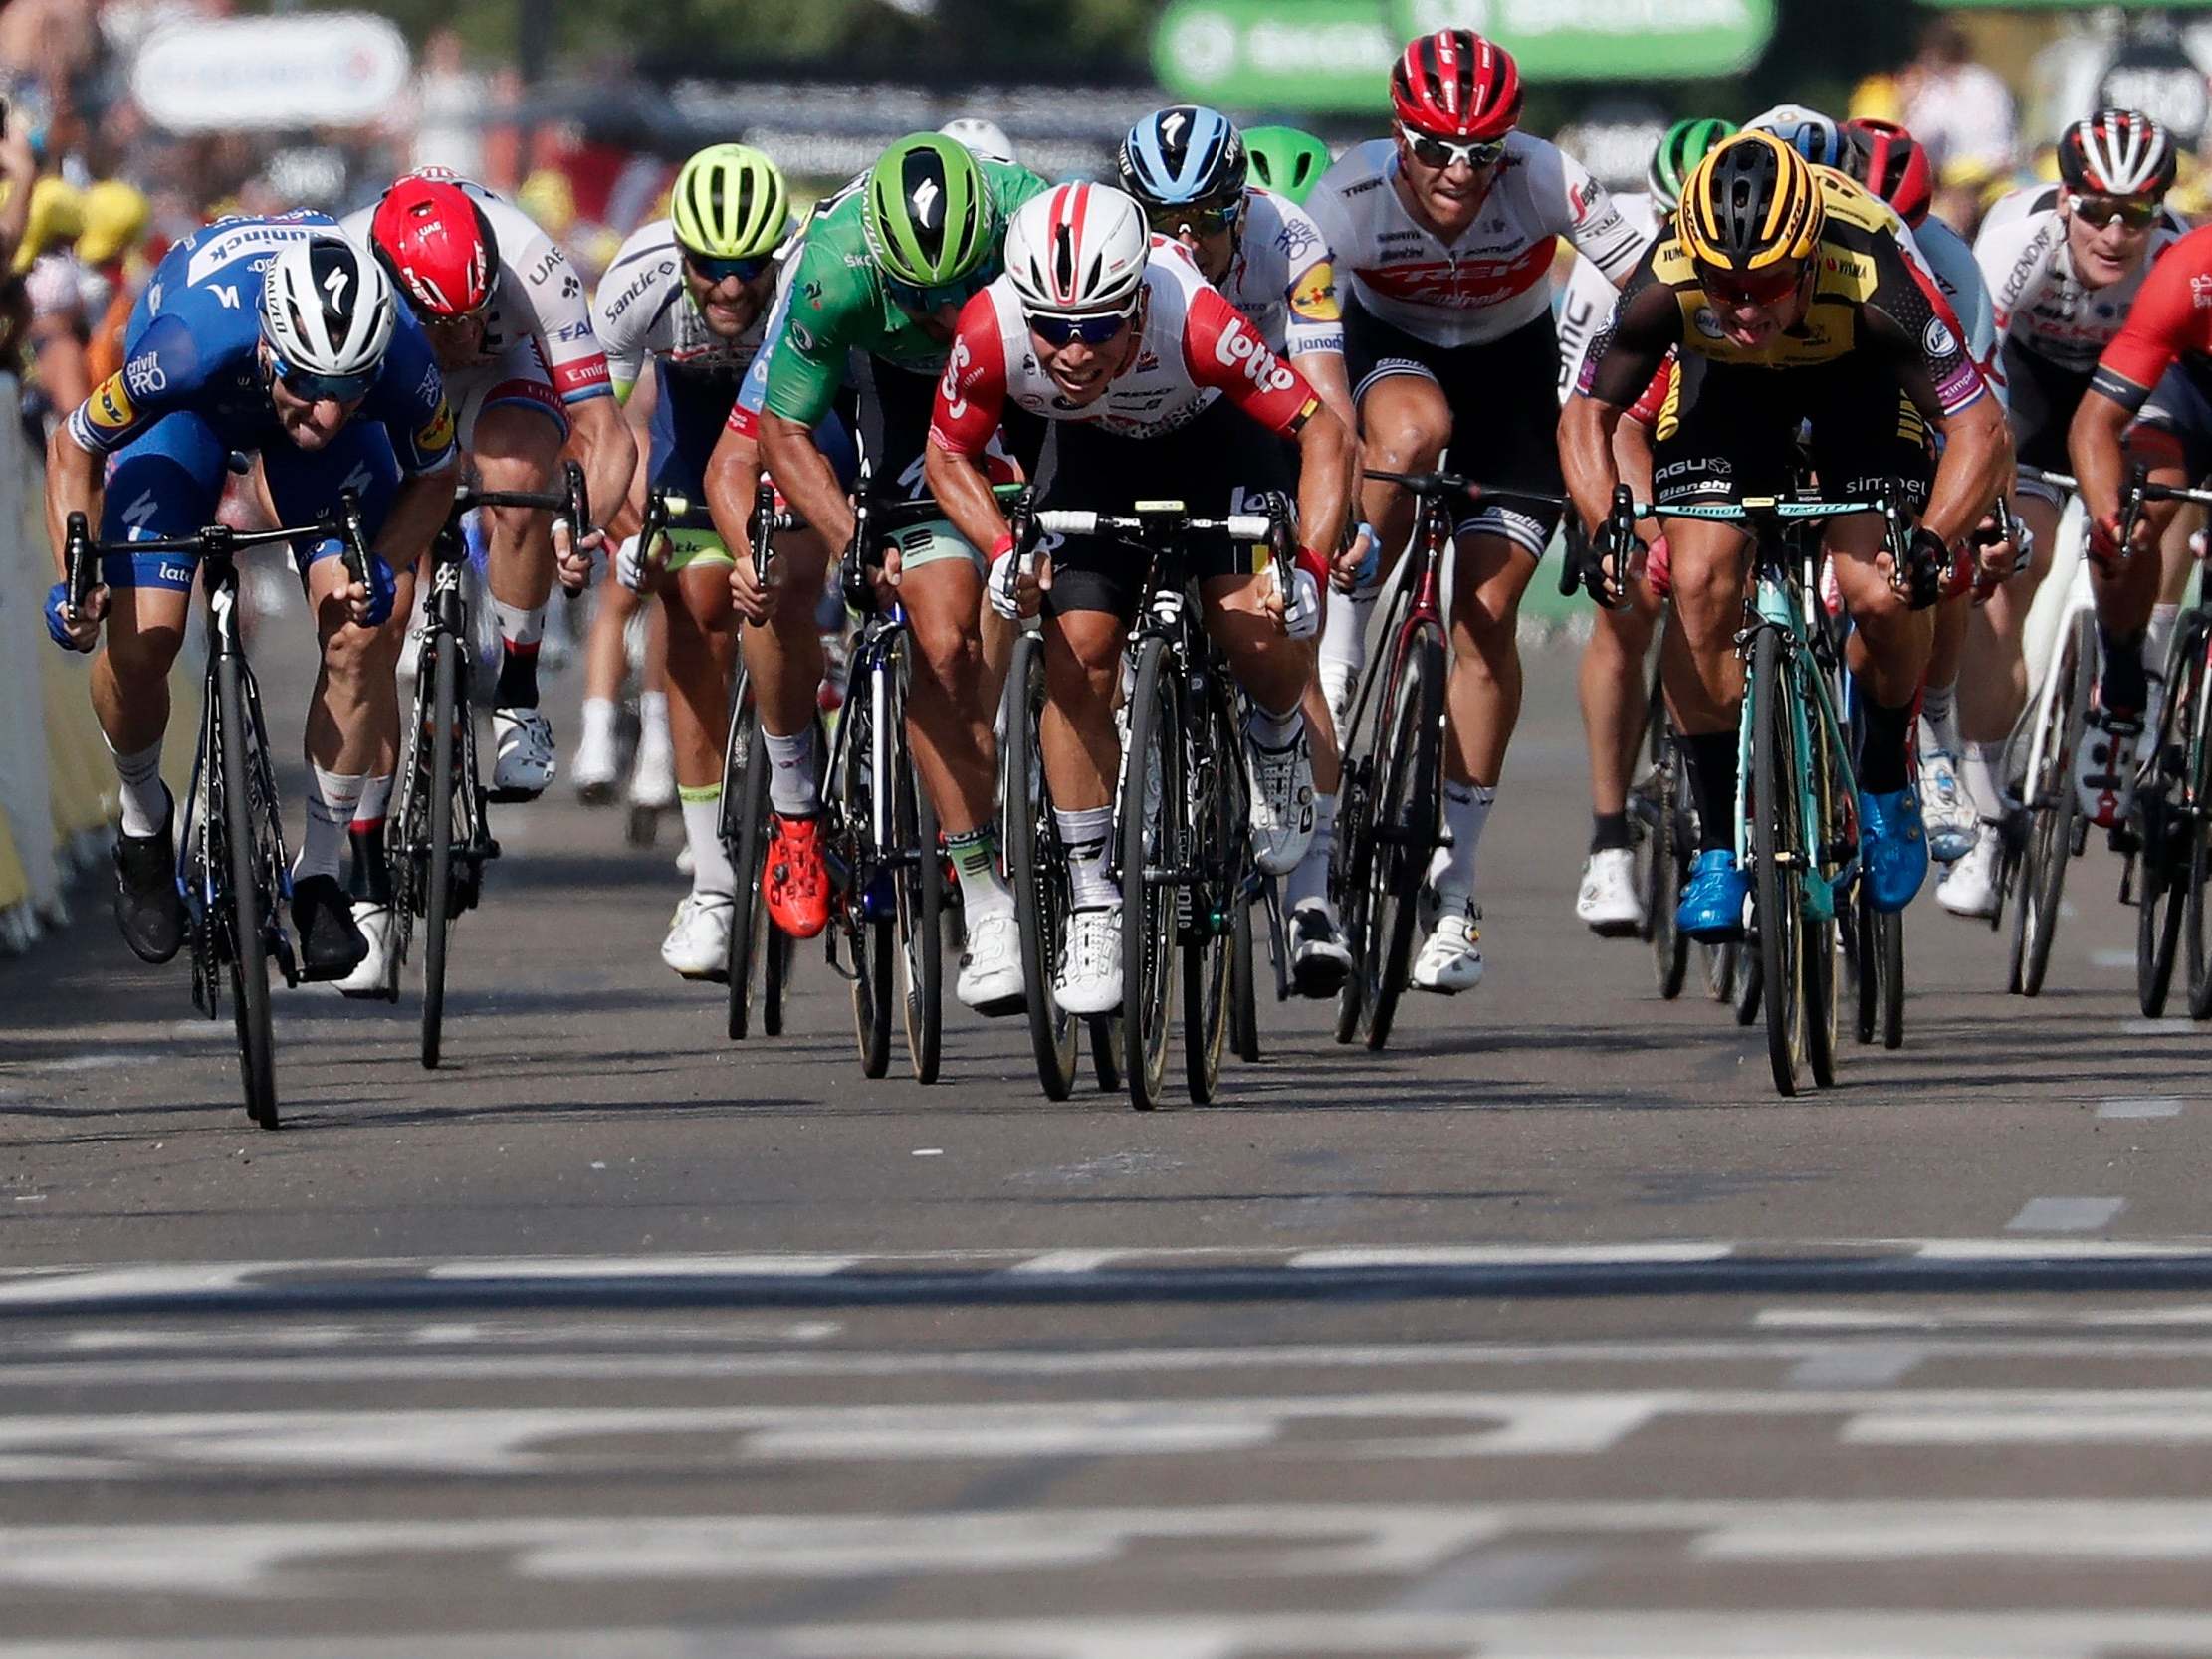 Caleb Ewan, centre, speeds to victory on stage 16 in Nimes